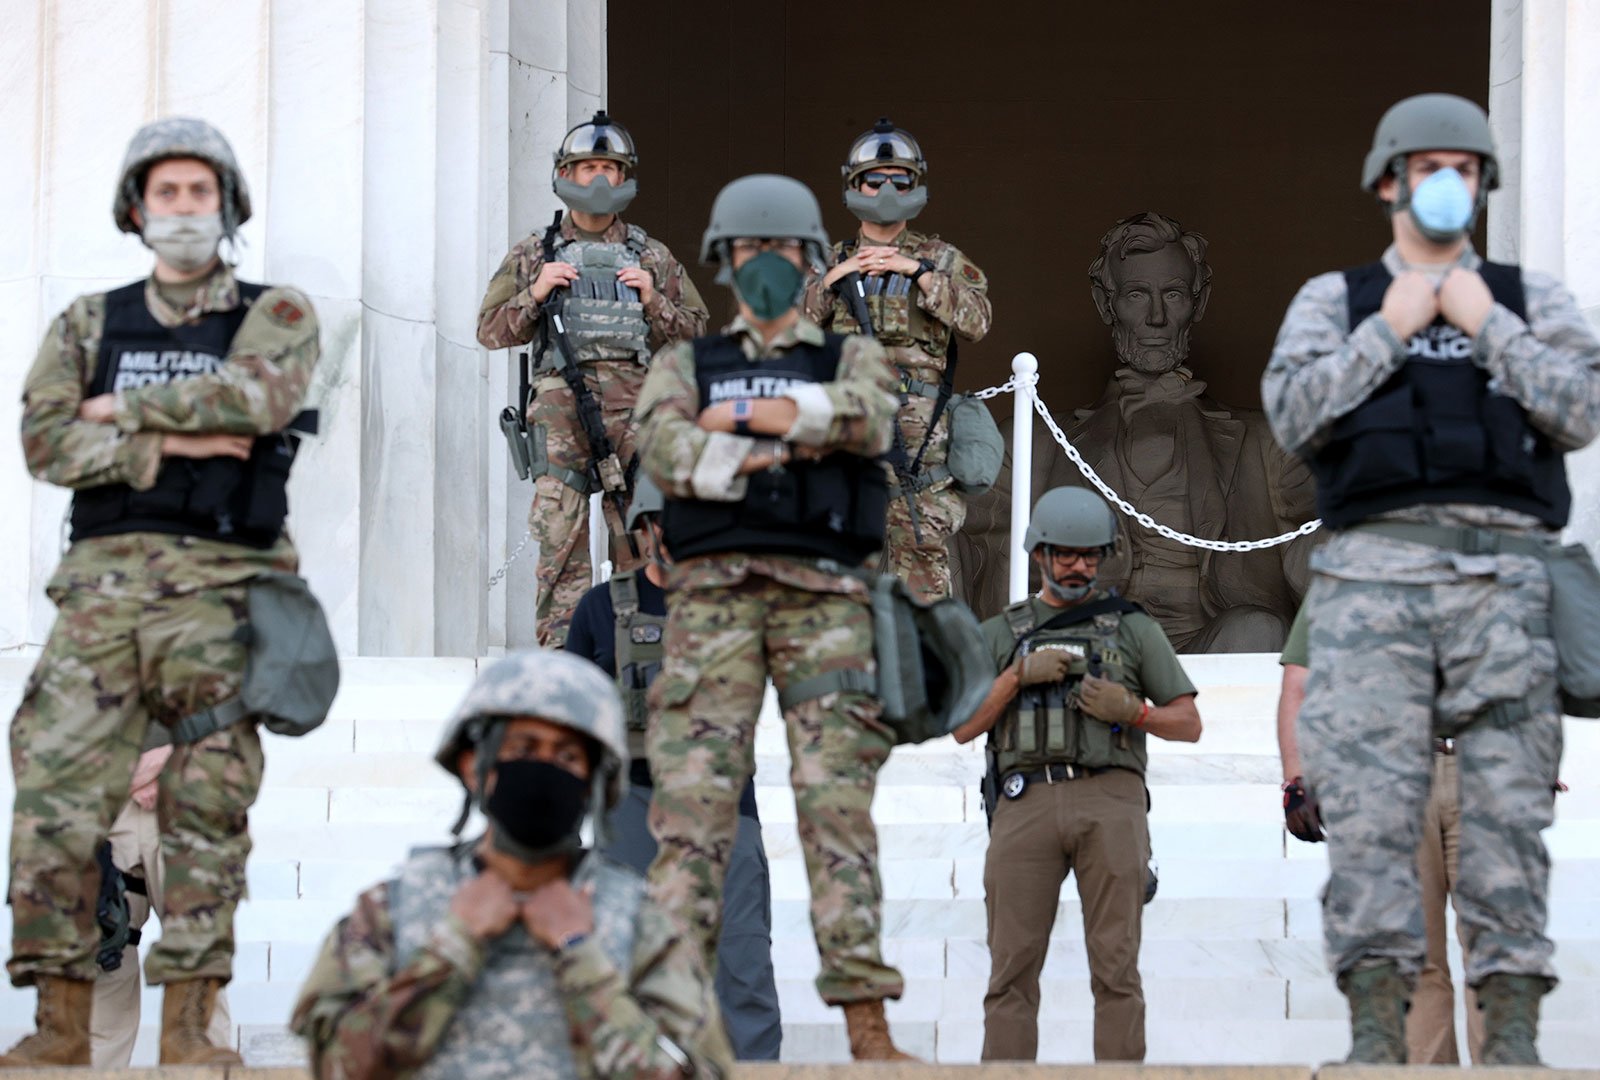 Members of the DC National Guard stand on the steps of the Lincoln Memorial on June 2.